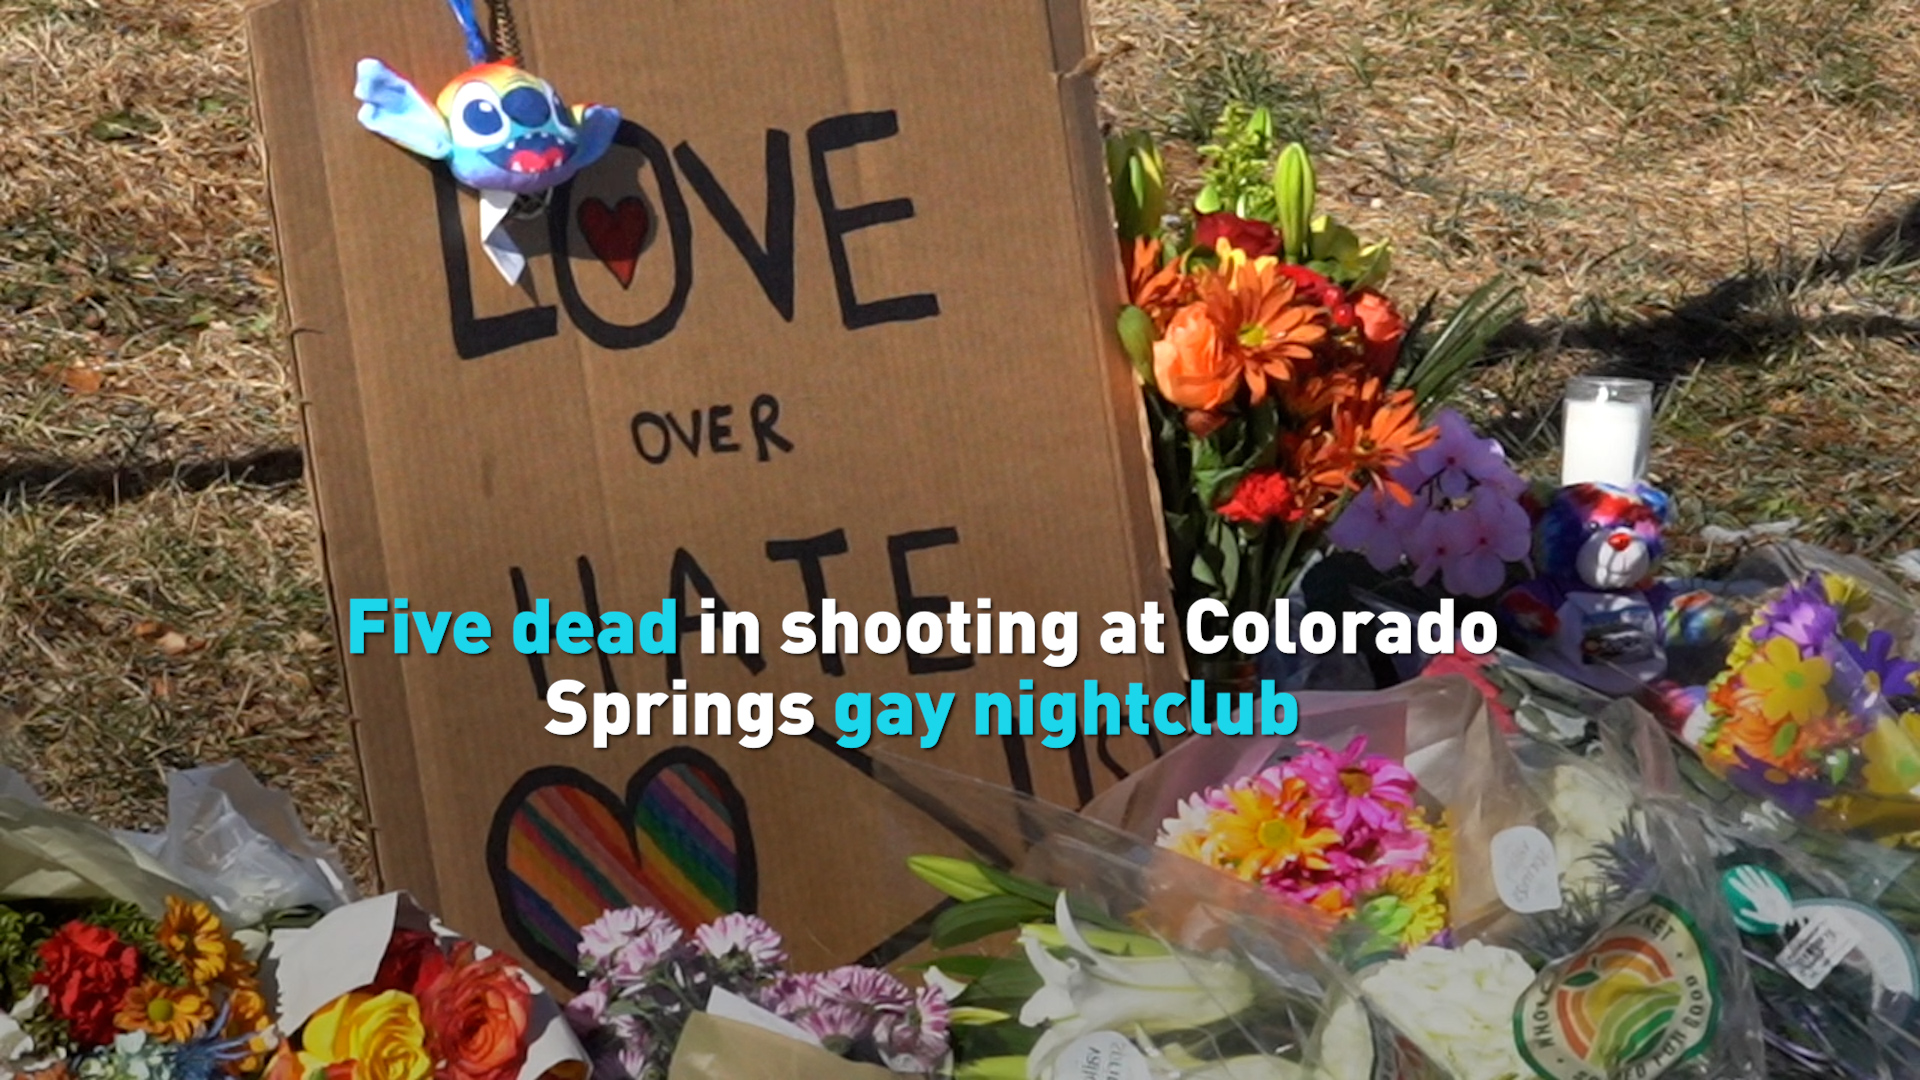 Colorado gay club shooter identified as "non-binary," 70% of abortion-related violence is against pro-lifers (& other stories)